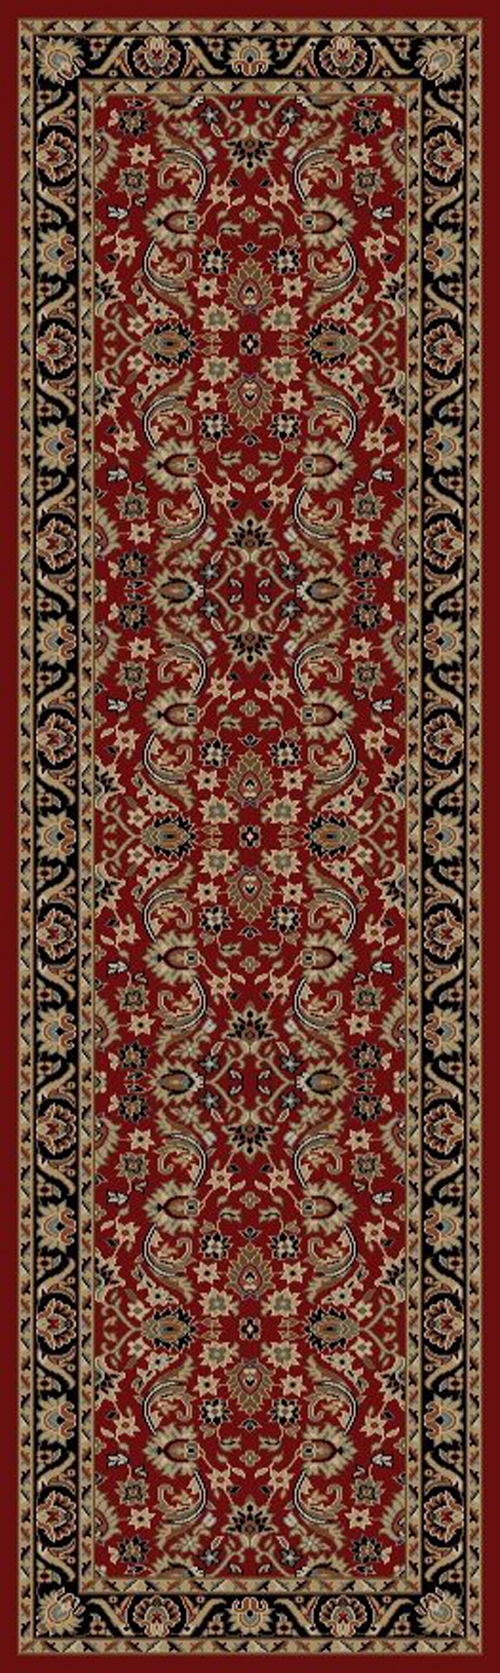 concord global ankara sultanabad red